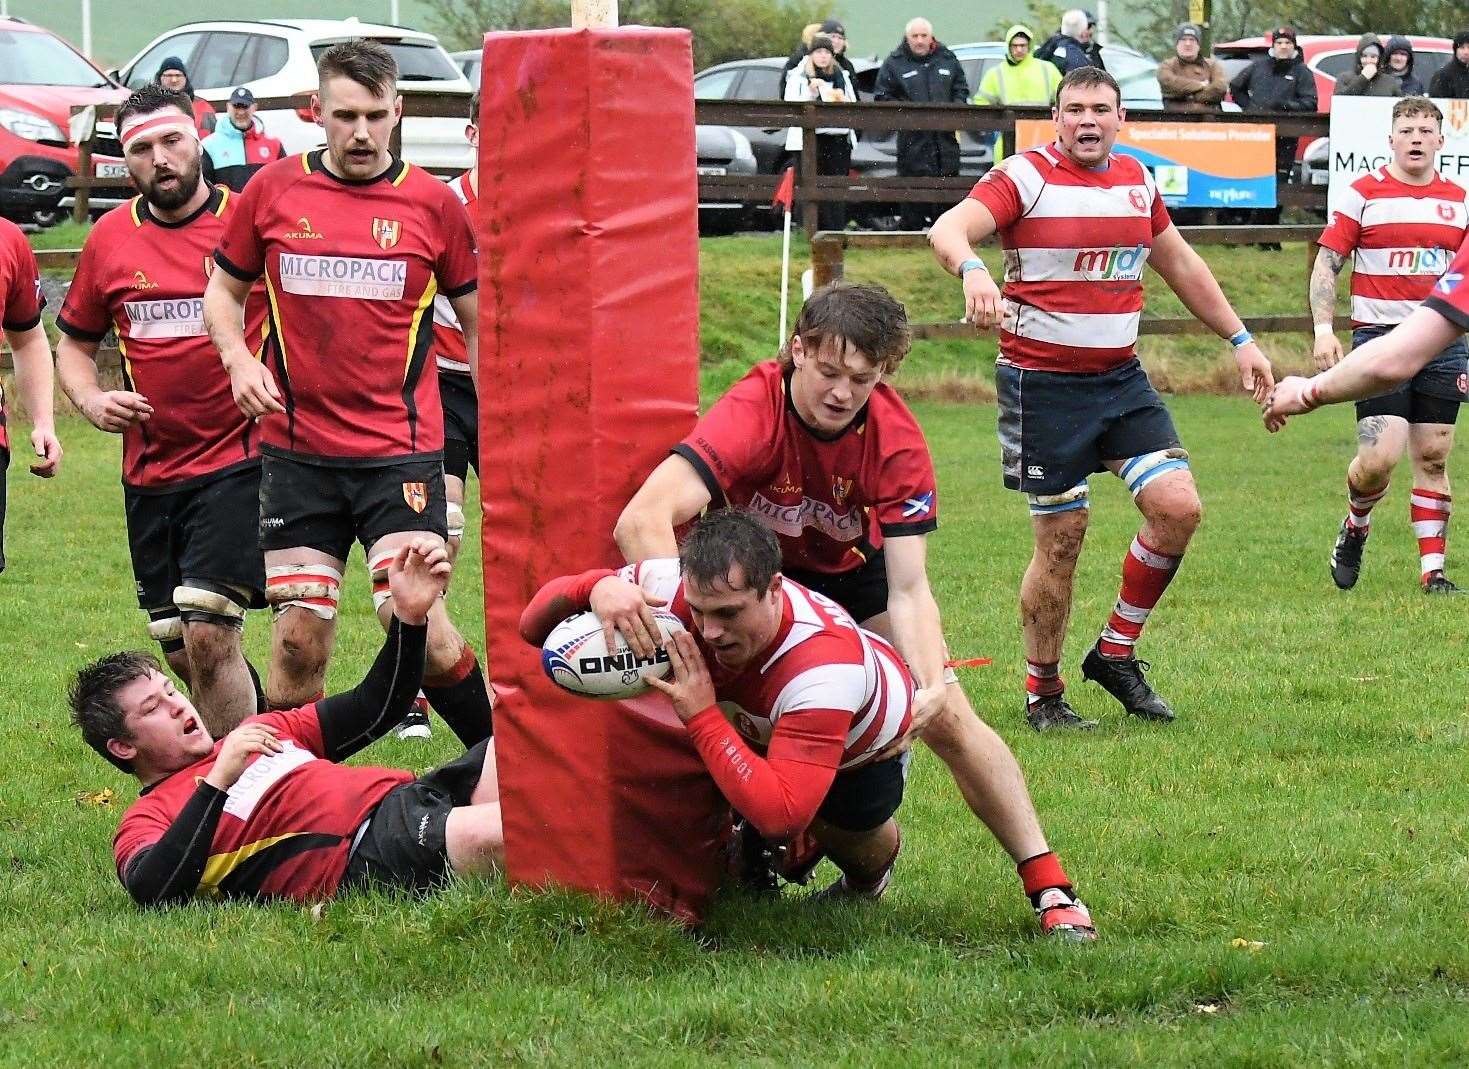 Cameron Hughes breaks tackle to score first try. In background is Steven Clark and Lewis Scott. Photo: James Officer